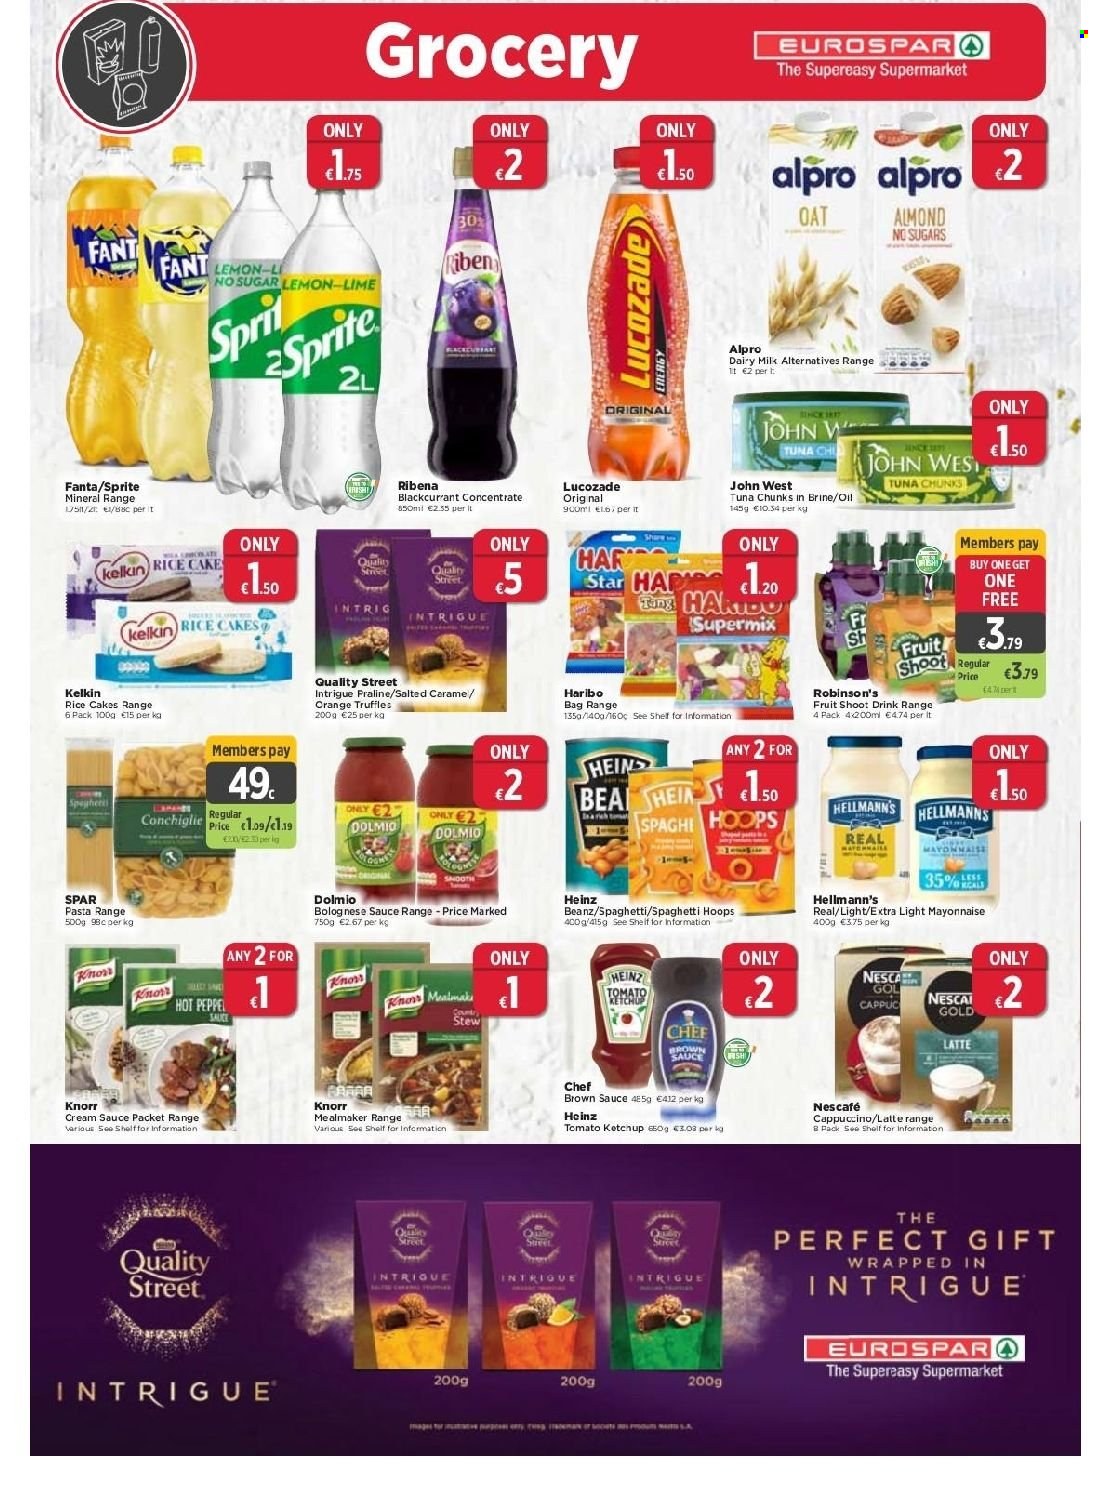 EUROSPAR offer  - 21.10.2021 - 10.11.2021 - Sales products - tuna, spaghetti, pasta, Knorr, sauce, Alpro, milk, mayonnaise, Hellmann’s, Haribo, truffles, Heinz, rice, ketchup, brown sauce, oil, Sprite, Fanta, Lucozade, cappuccino. Page 4.